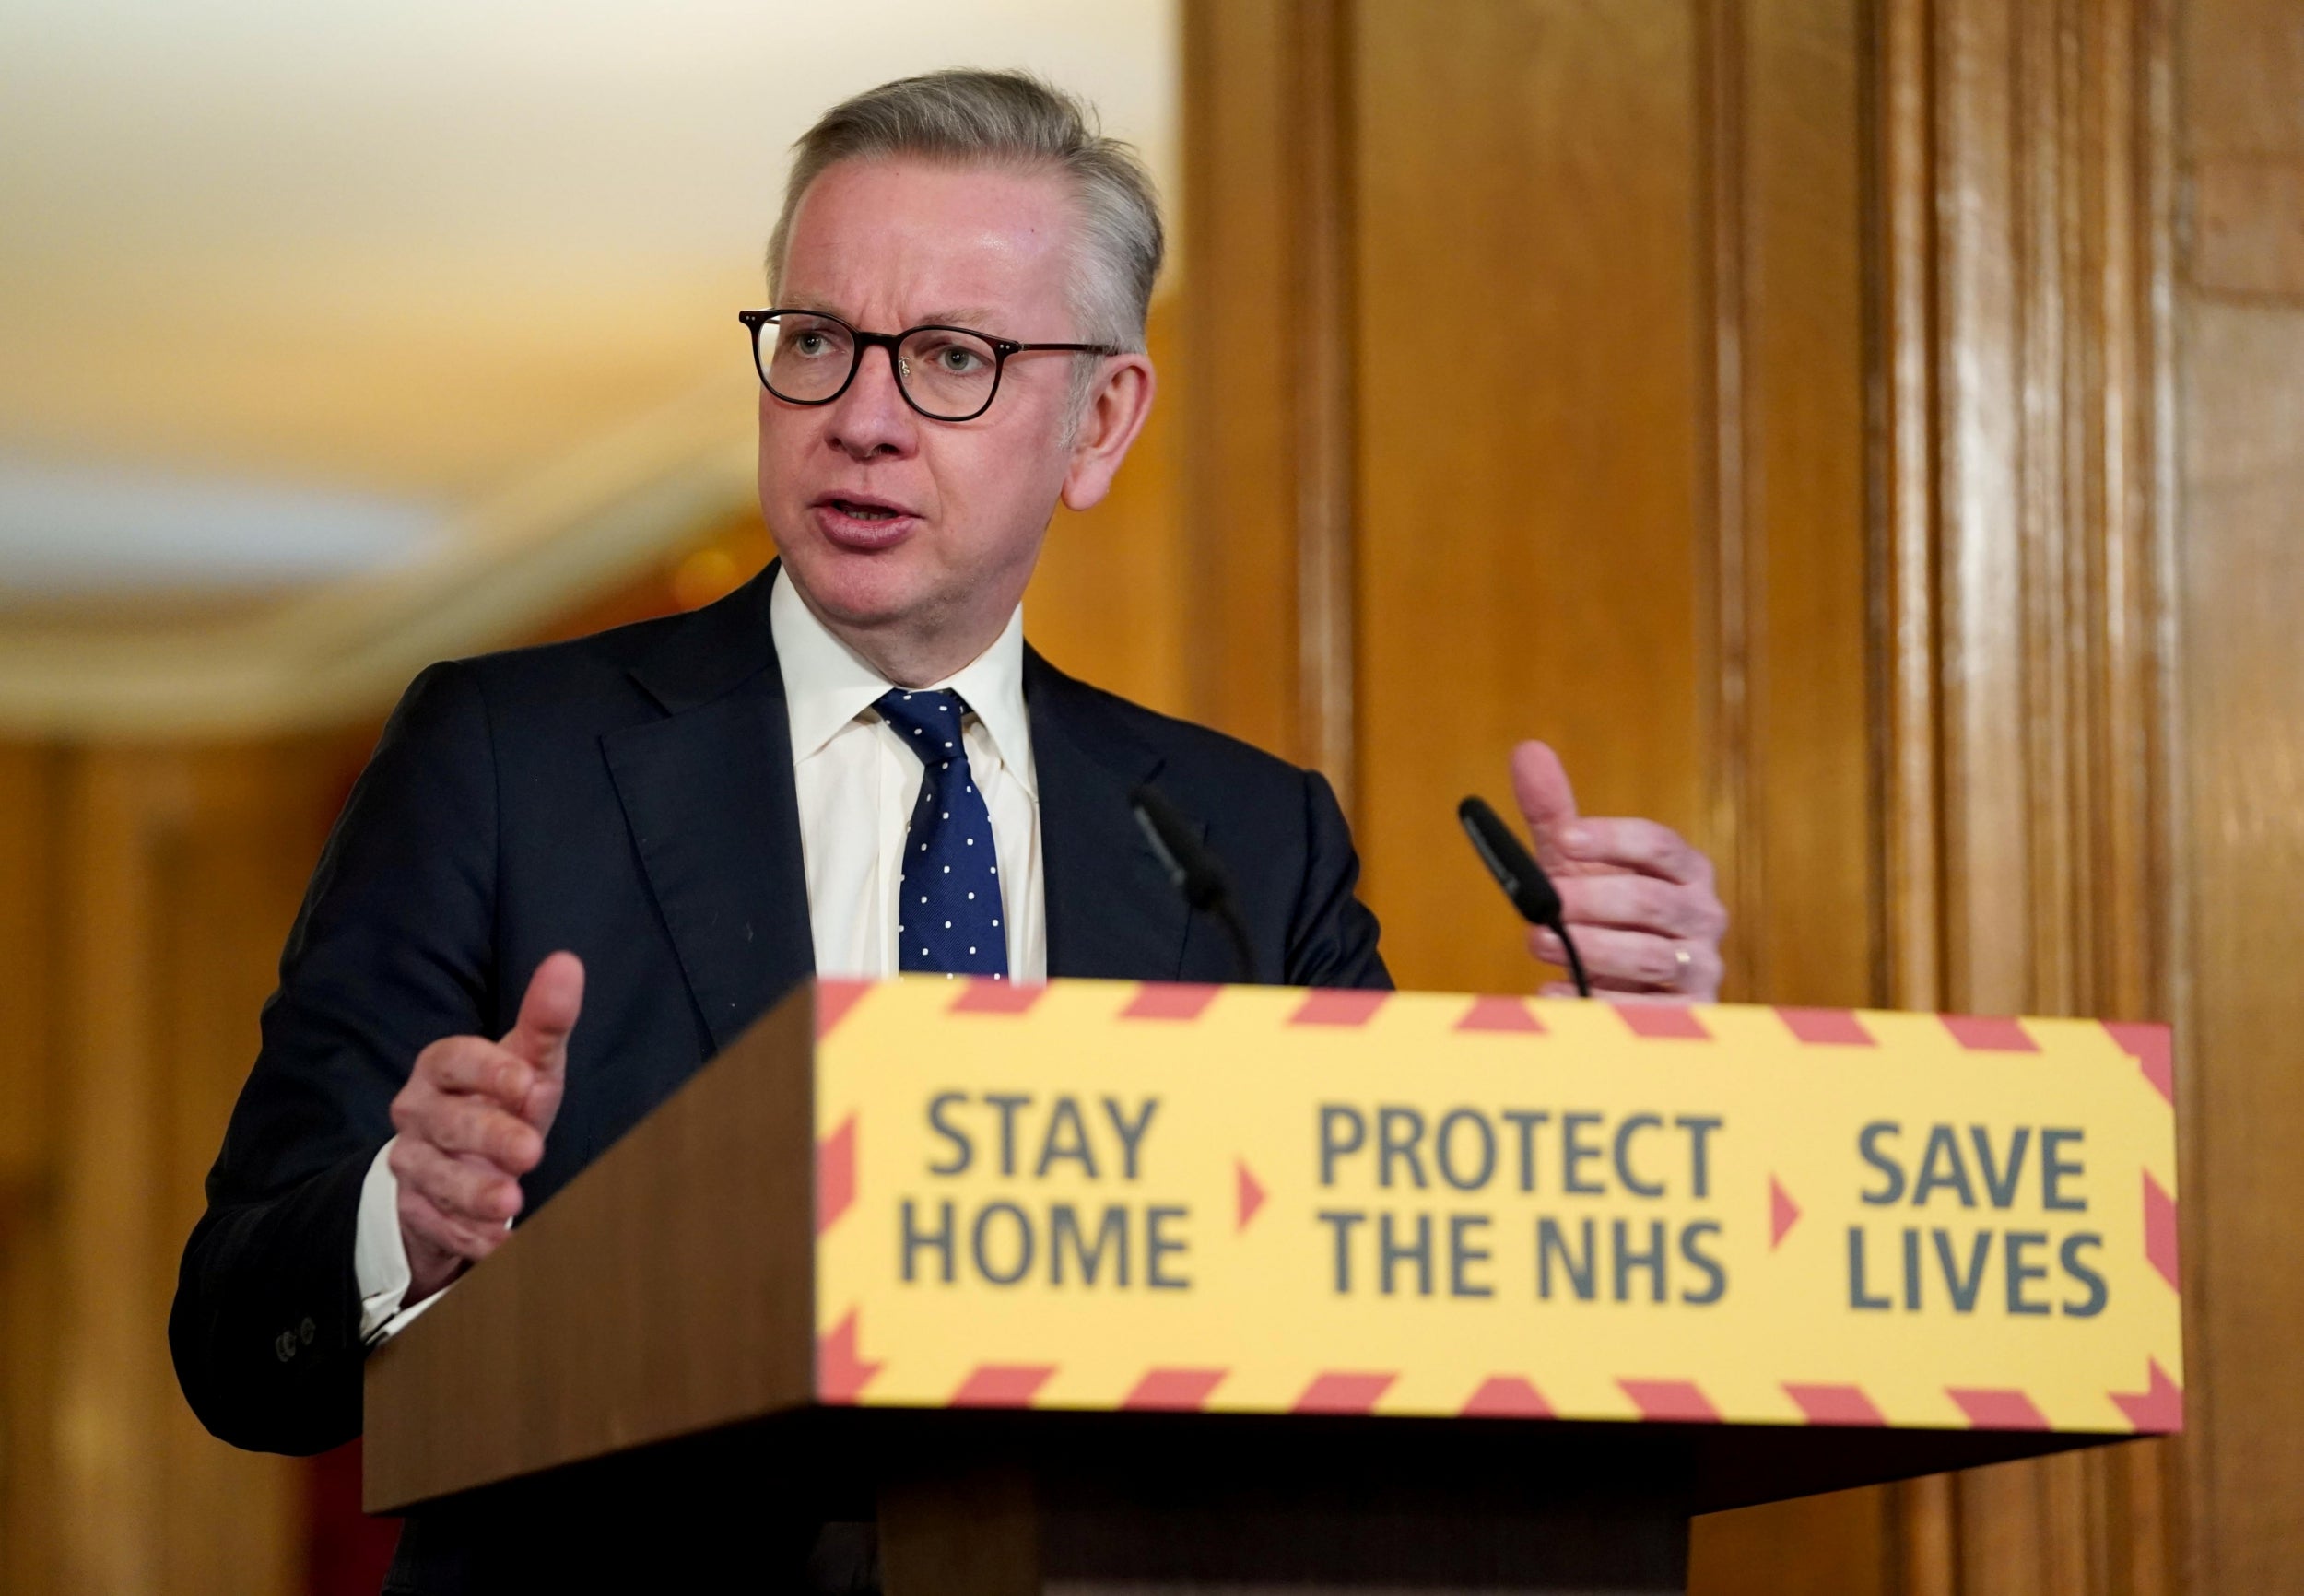 Mr Gove said there was ‘no fixed point’ in the calendar the government can say when lockdown measures will change